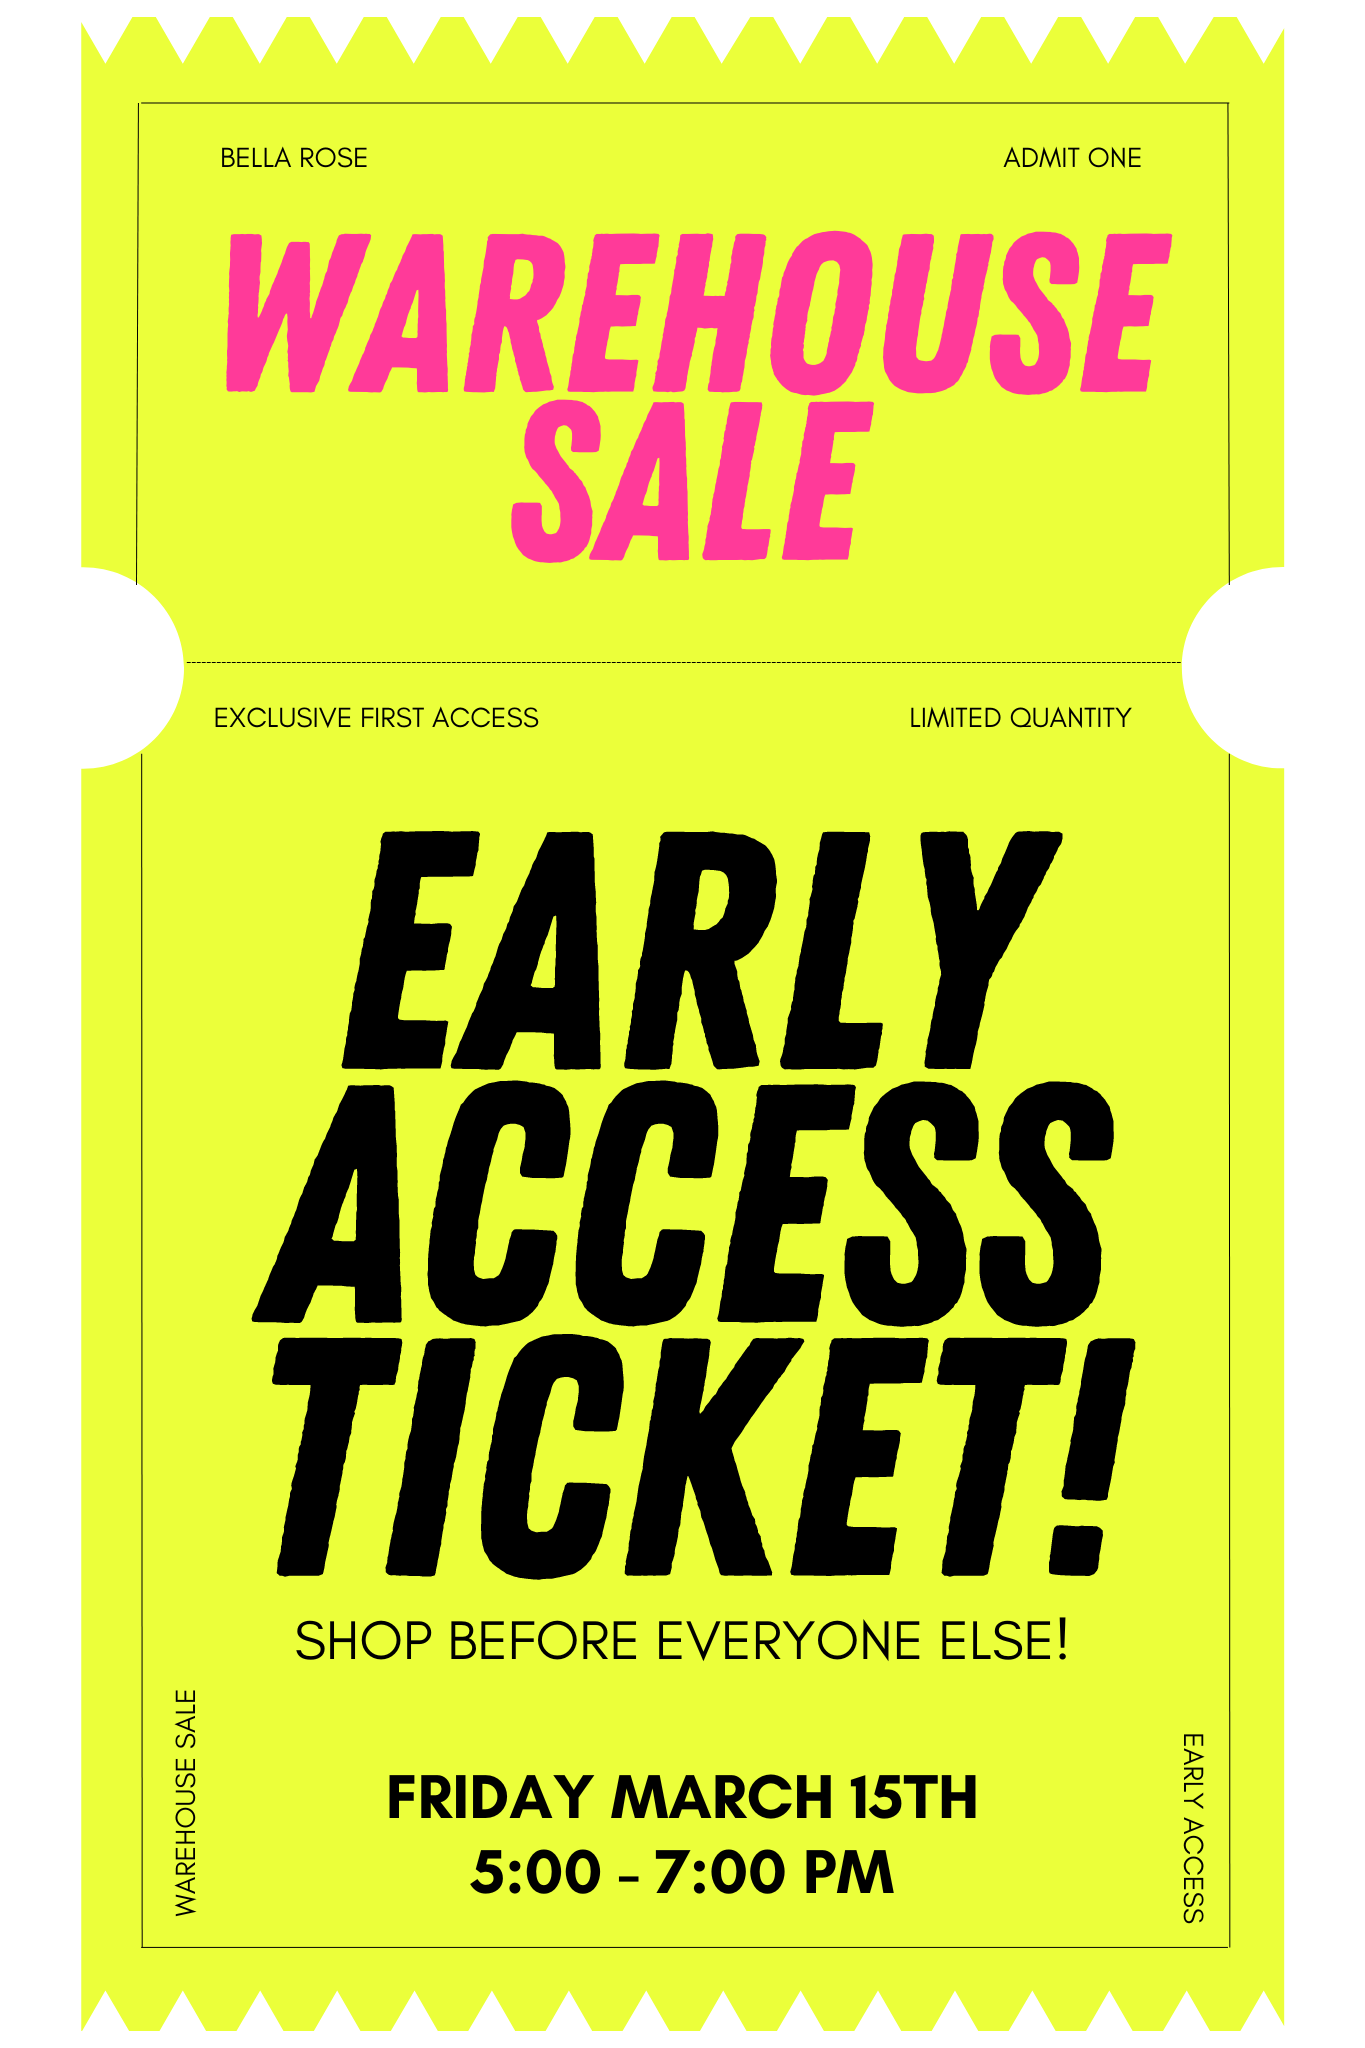 WAREHOUSE SALE EARLY ACCESS TICKETS